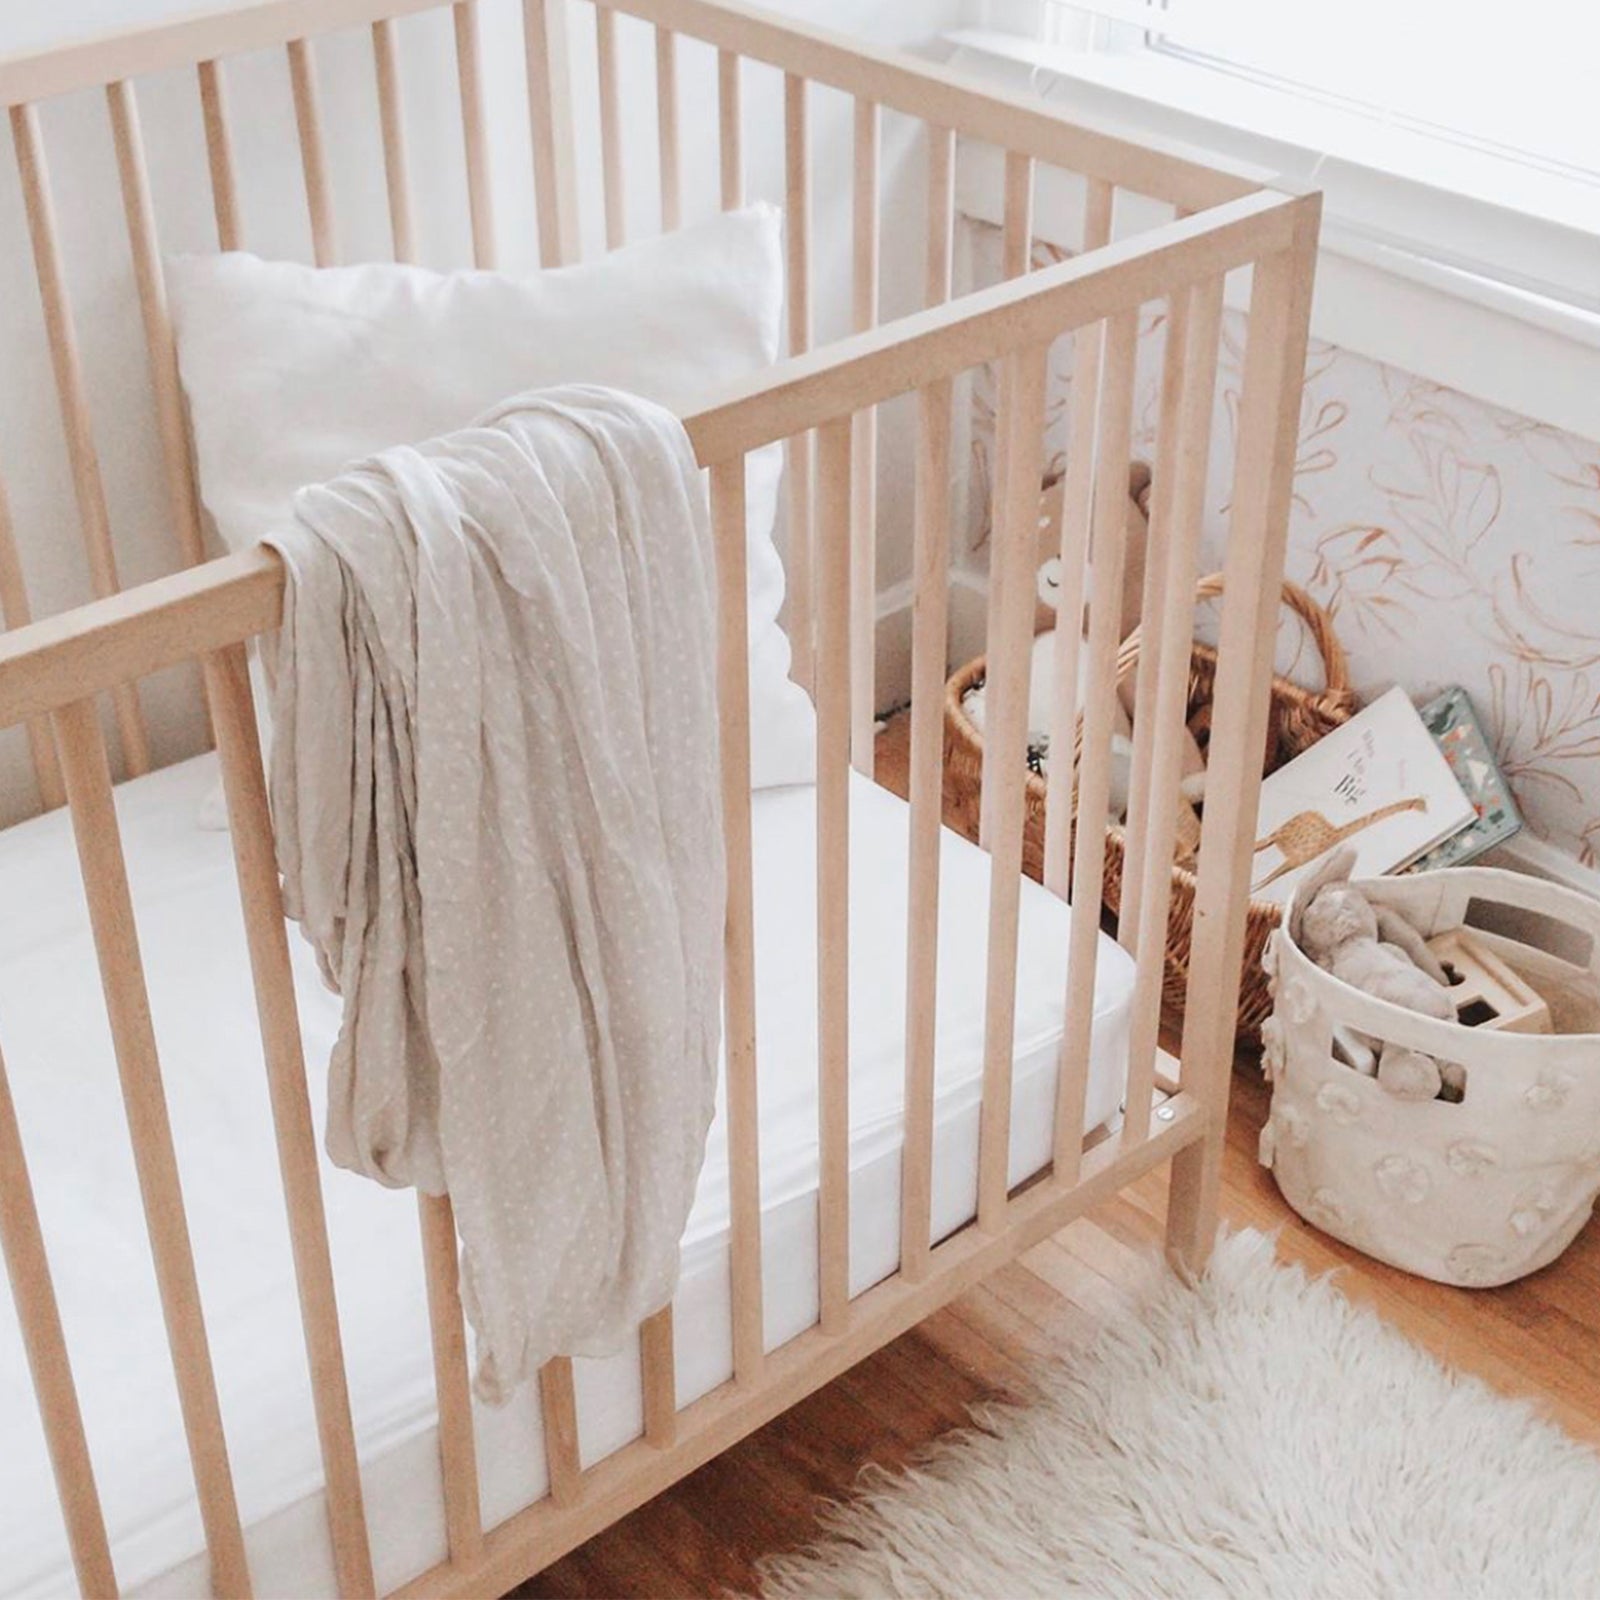 Wooden crib with white sheet with toys in baskets on the ground 